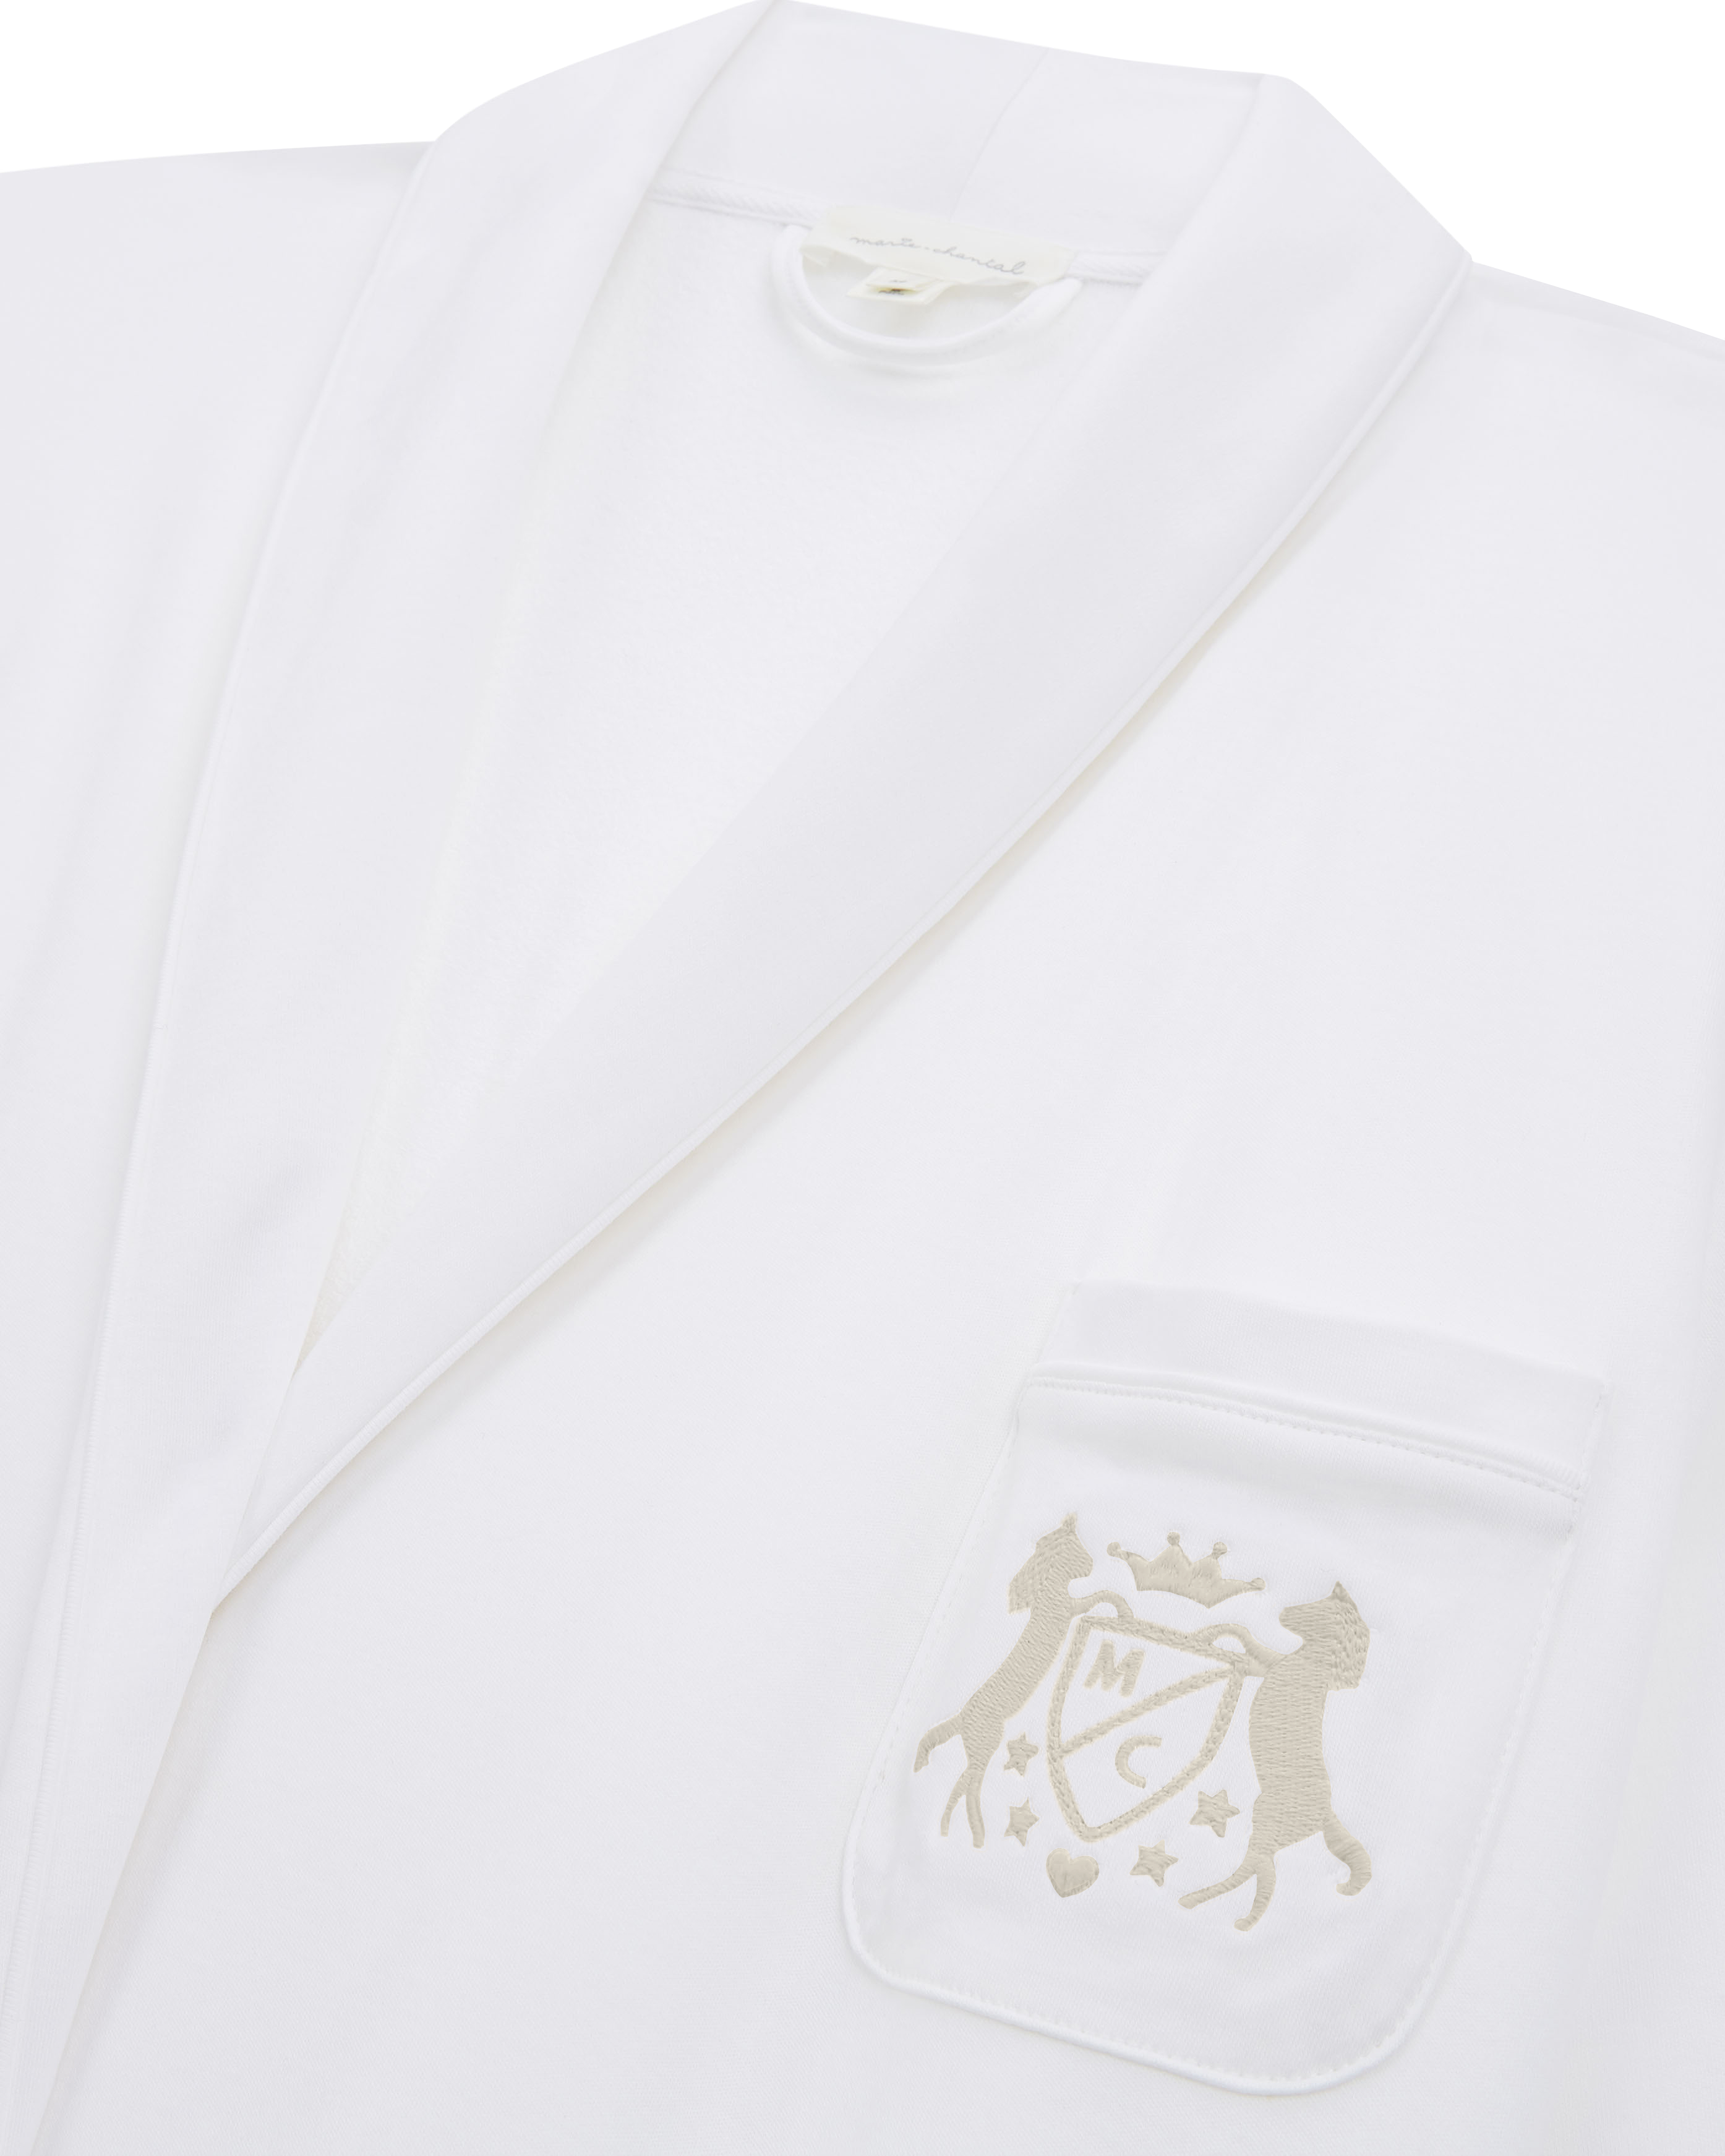 The Crest Robe - Adult